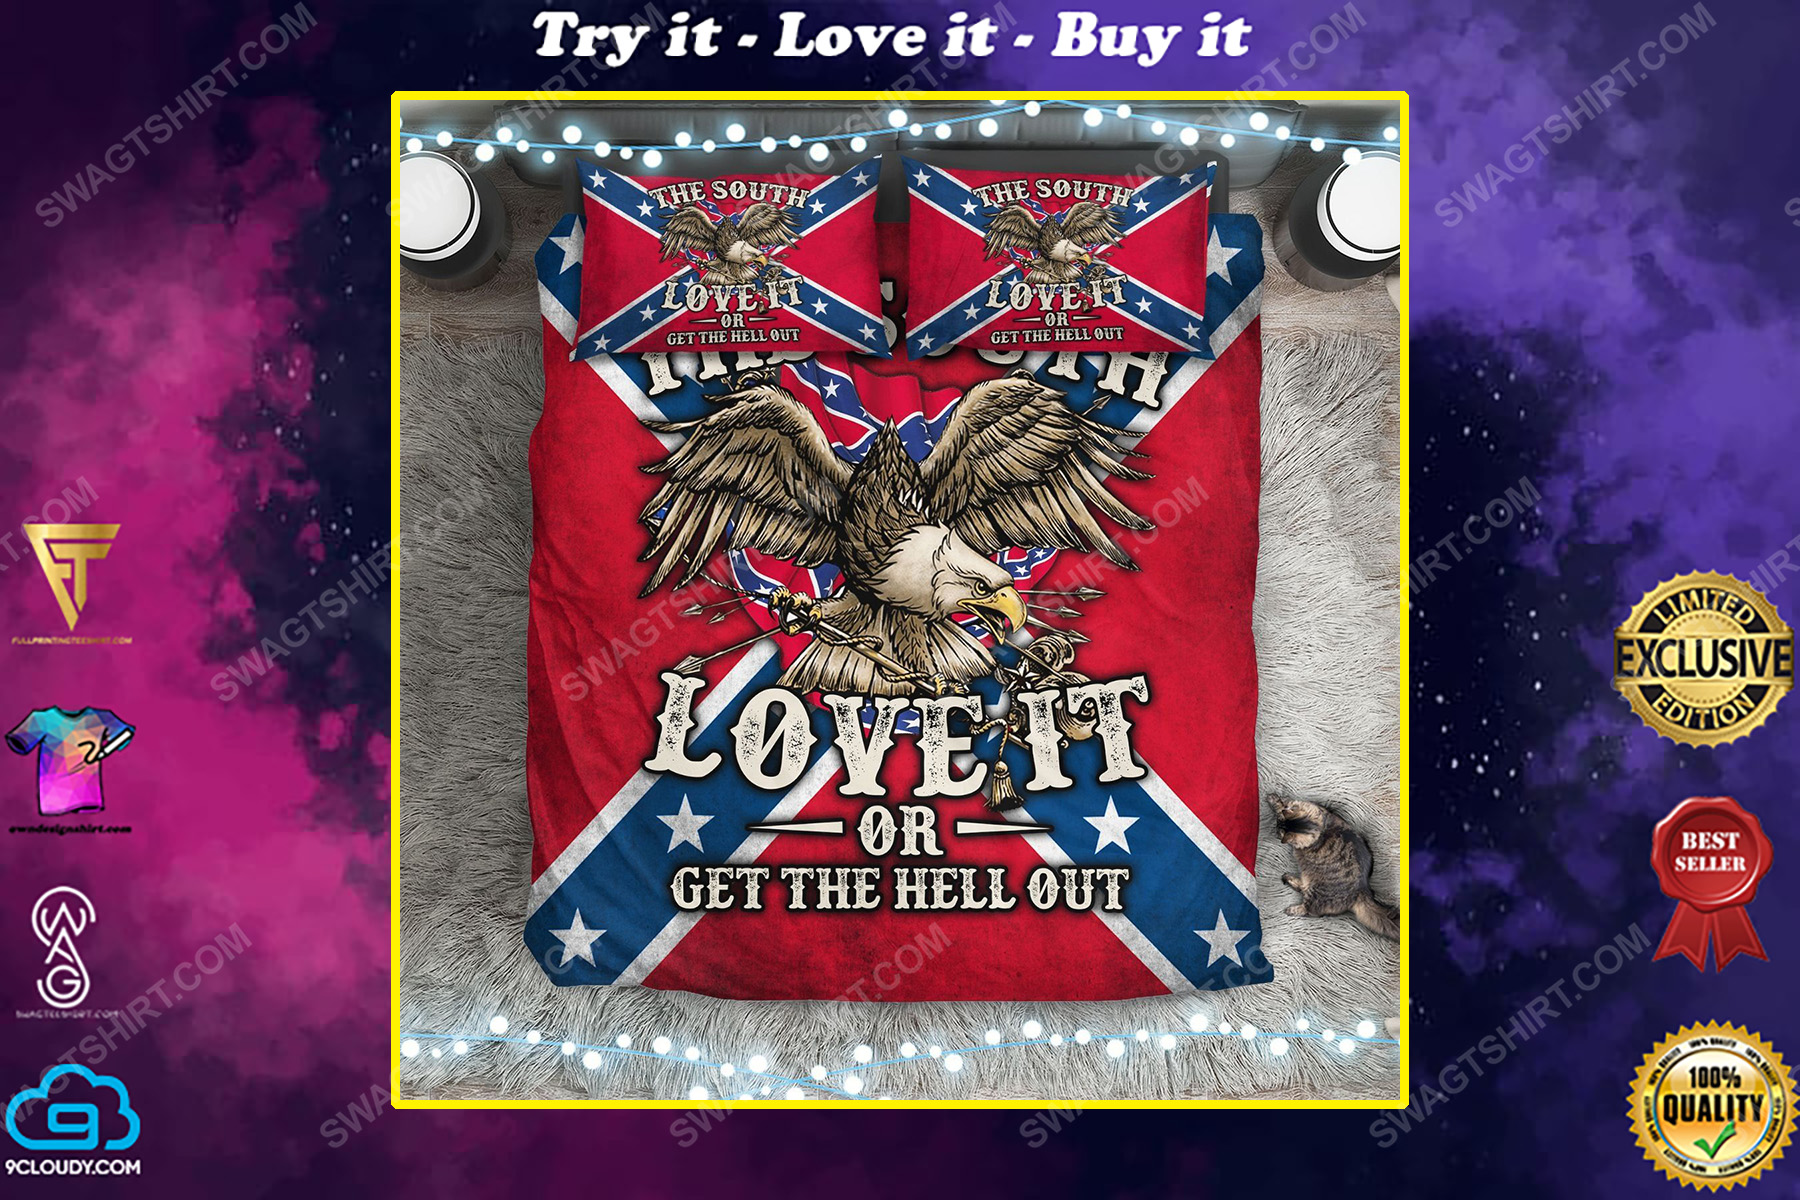 Confederate southern flag eagle the south love it or get the hell out bedding set